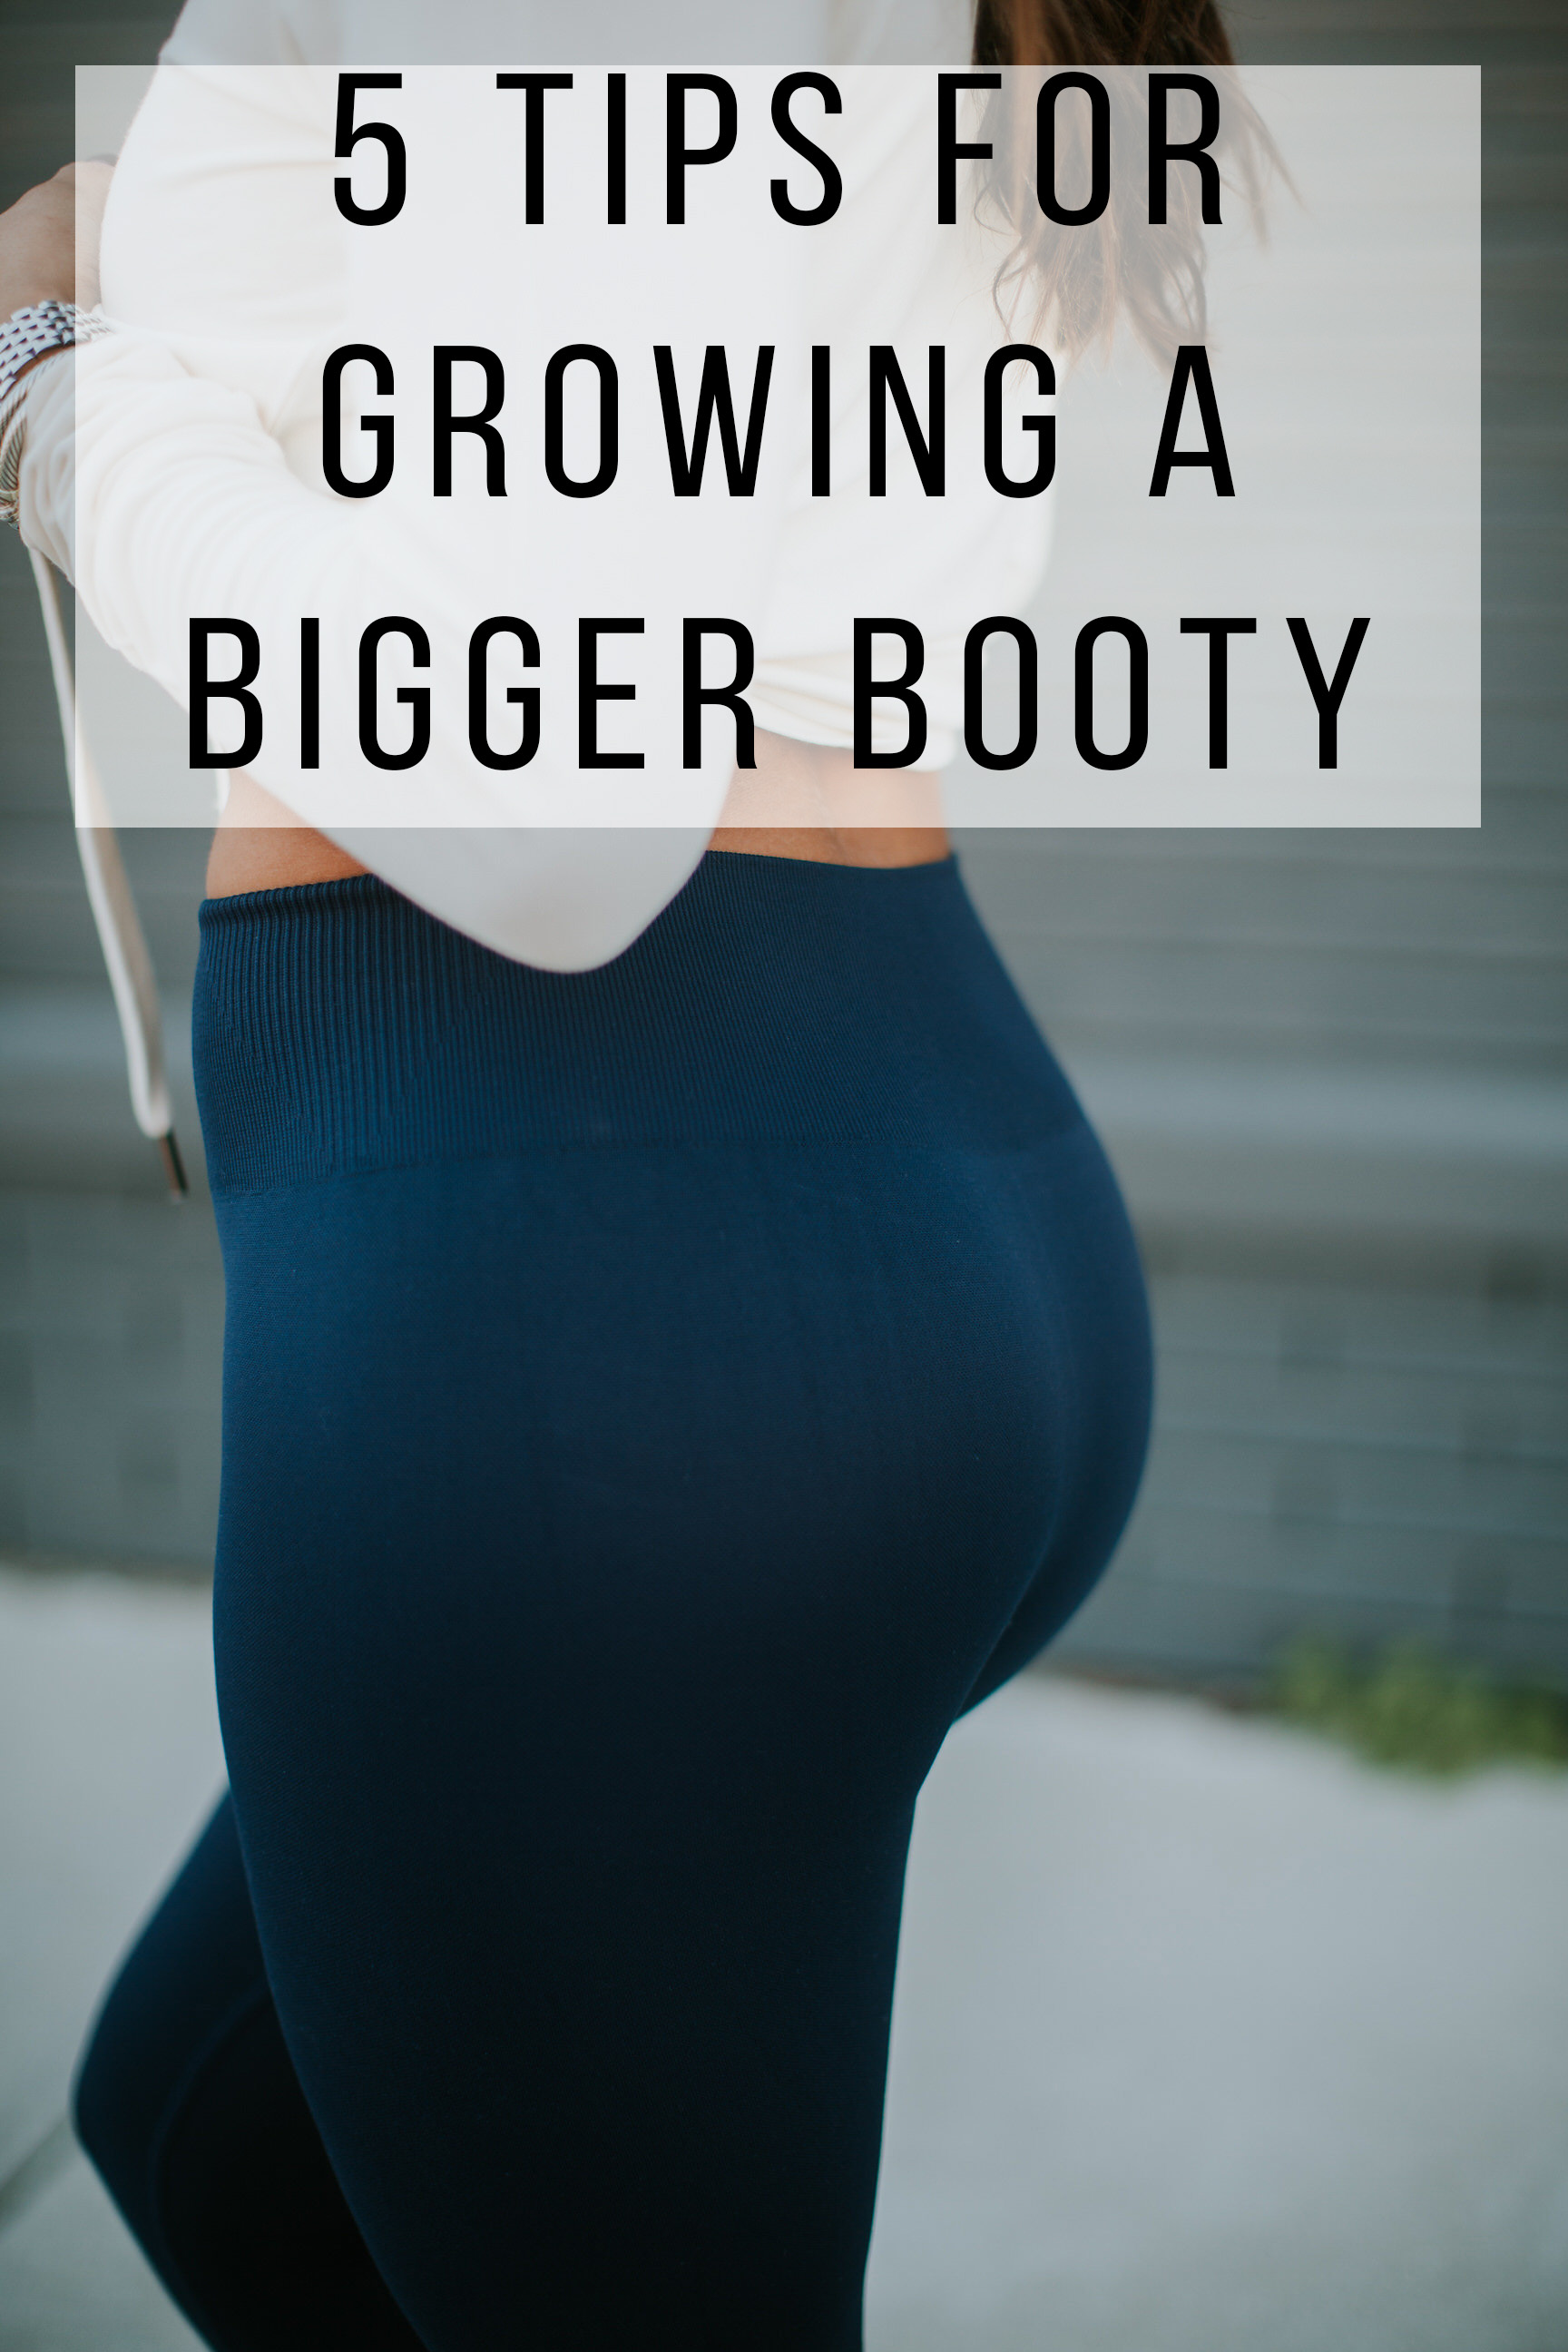 tips for growing a bigger booty, booty guide, grow your glutes, glute exercises, glute tips, glute program, how to grow your booty, how to build a butt, how to build glutes, a southern drawl fitness, fitspiration, leg workout guide // grace wainwright a southern drawl